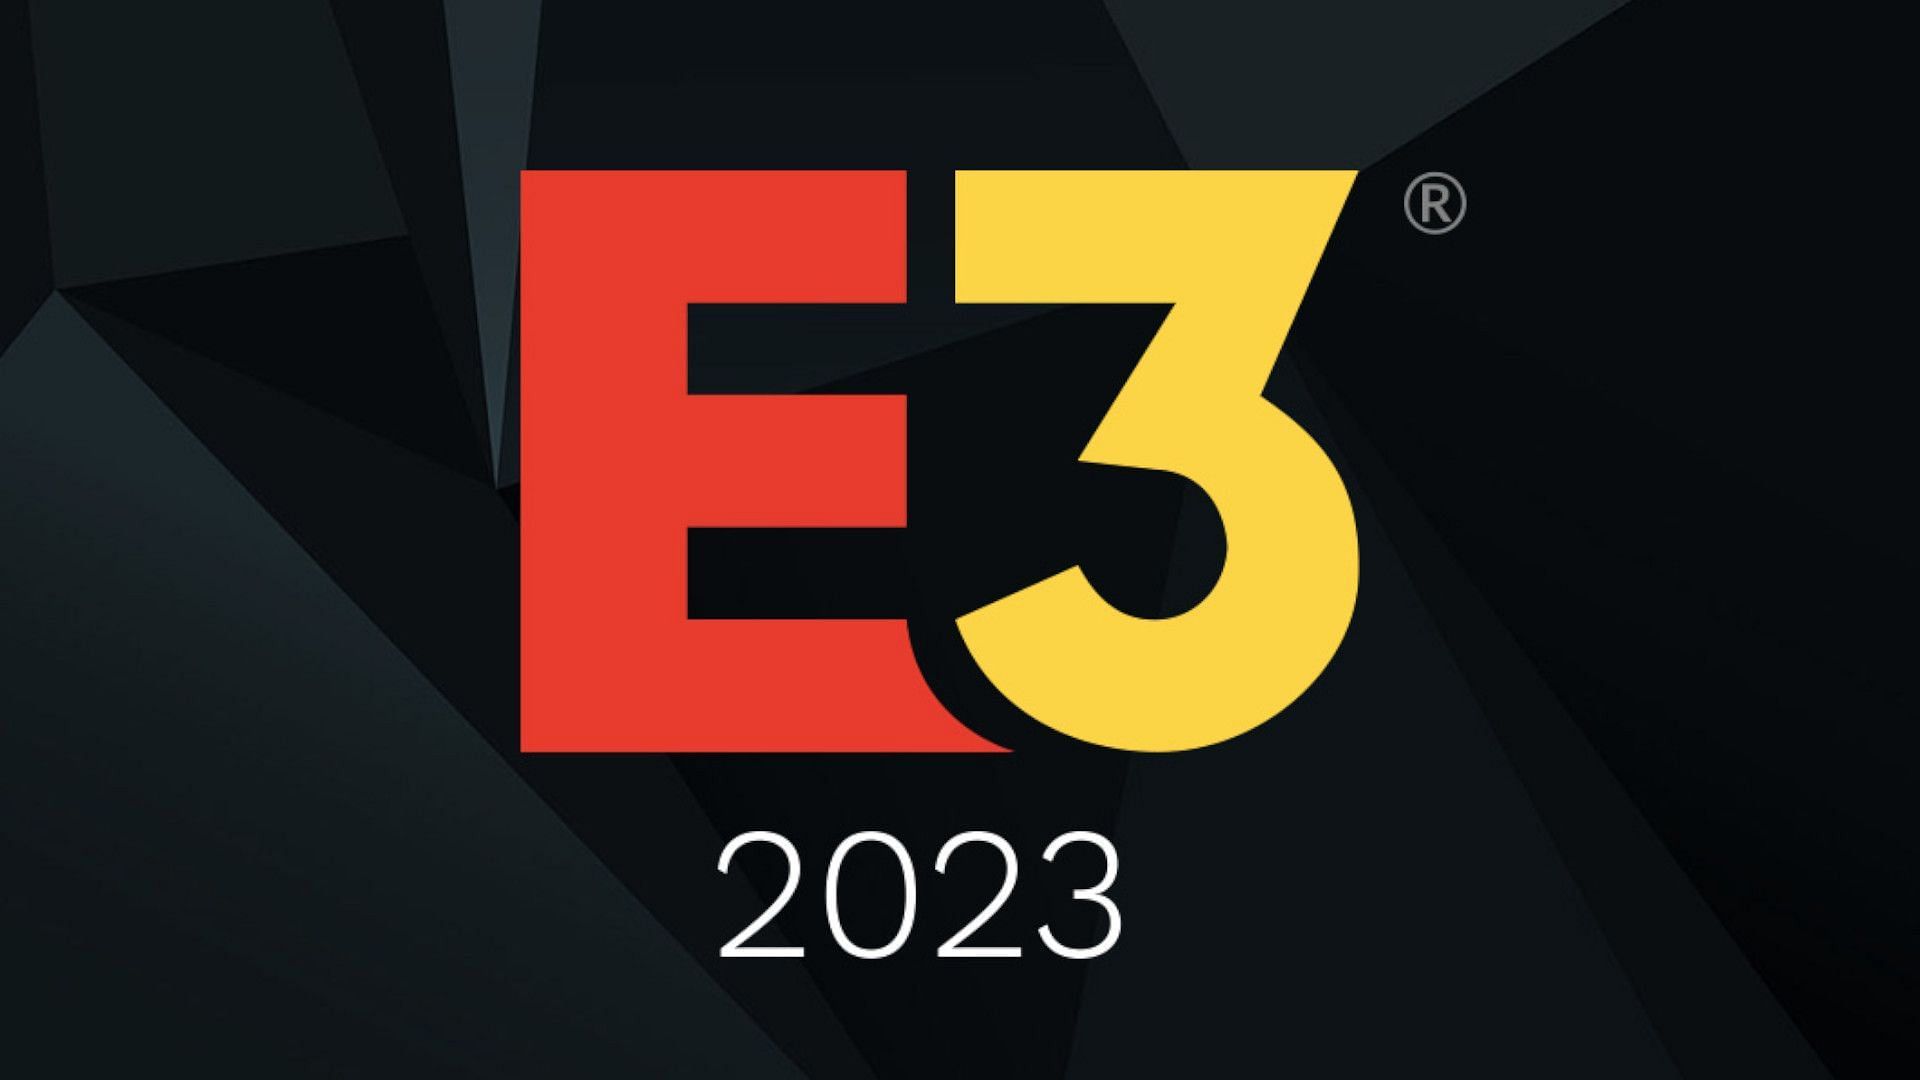 E3 2023 is unfortunately, being canceled.